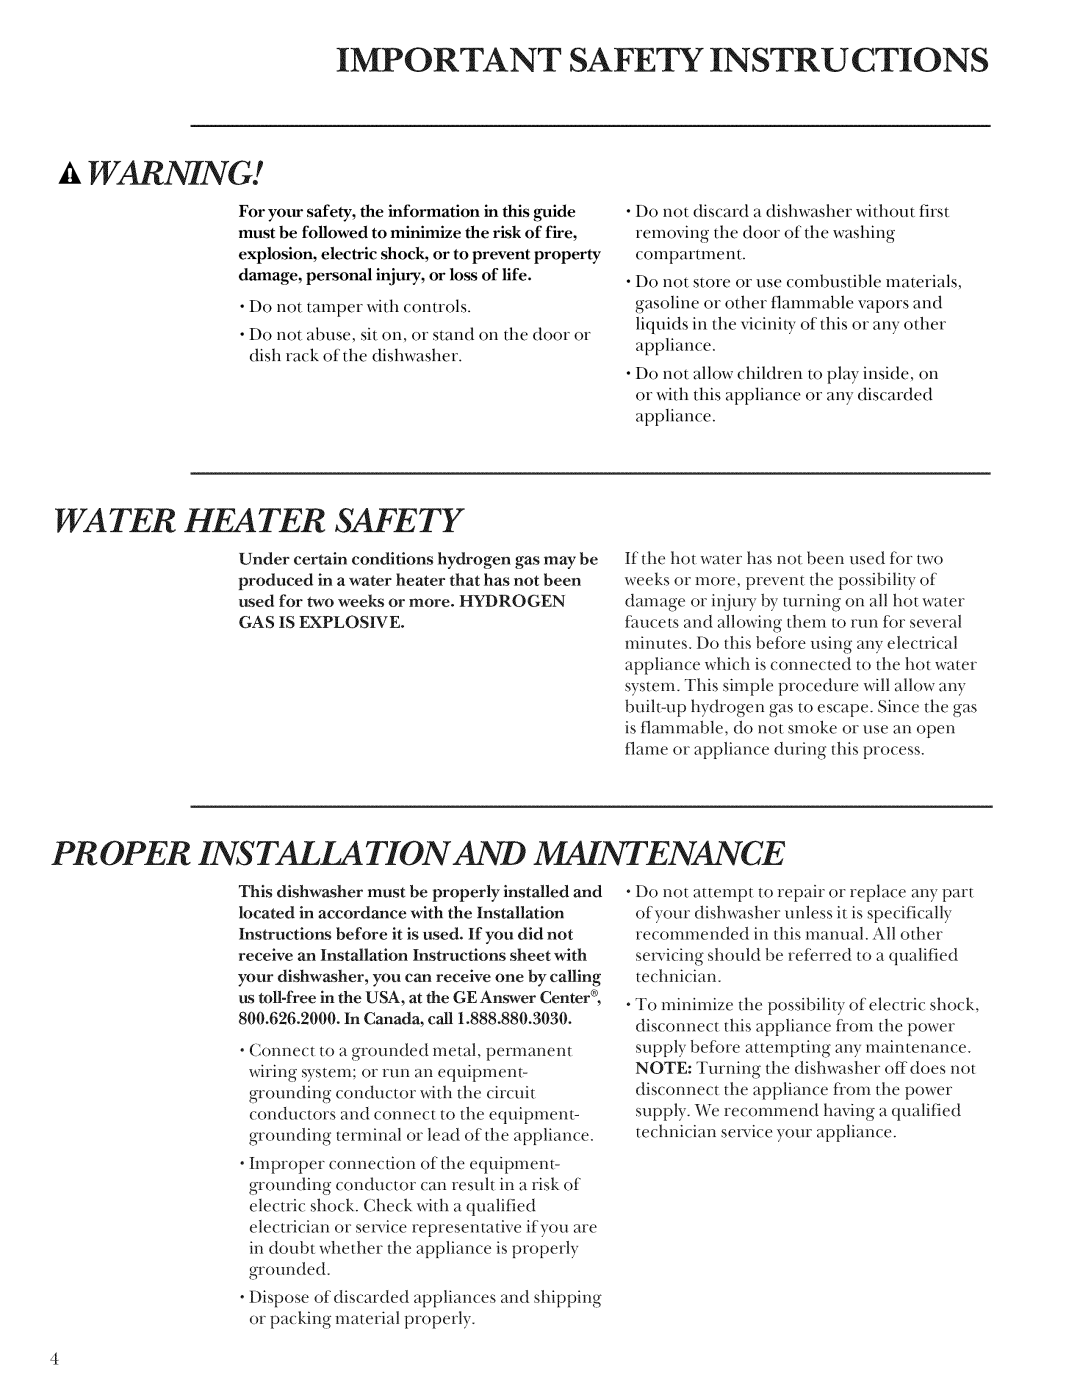 GE ZBD3500, ZBD3540 Important Safety Instructions, Proper Ins Talla Tion And Maintenance, t, WARNING, Water Heater Safety 